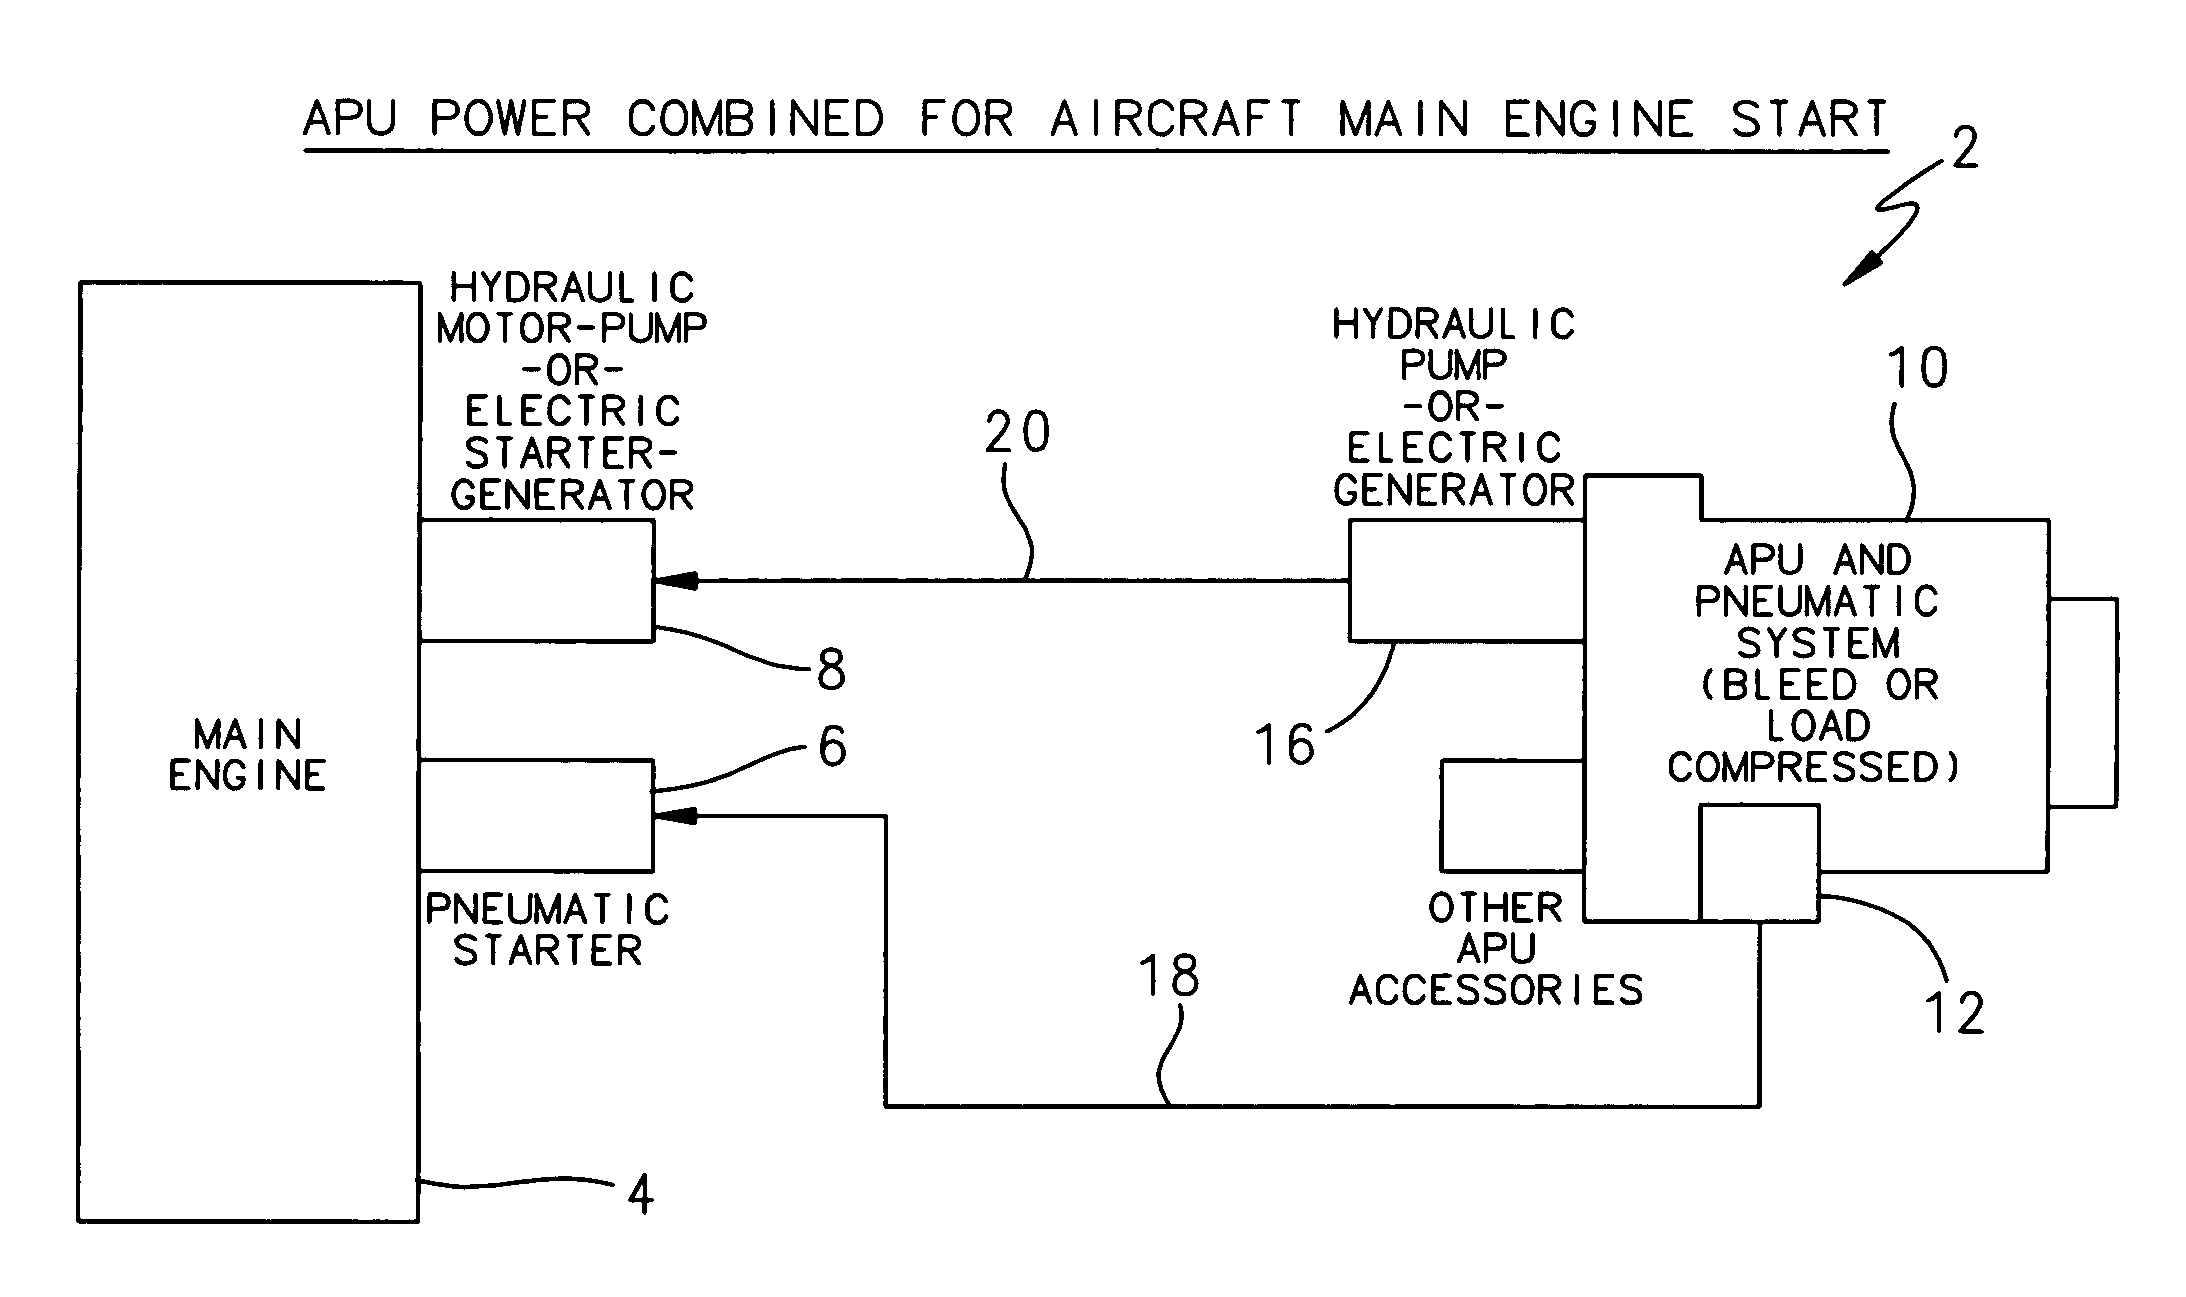 Combined power main engine start system